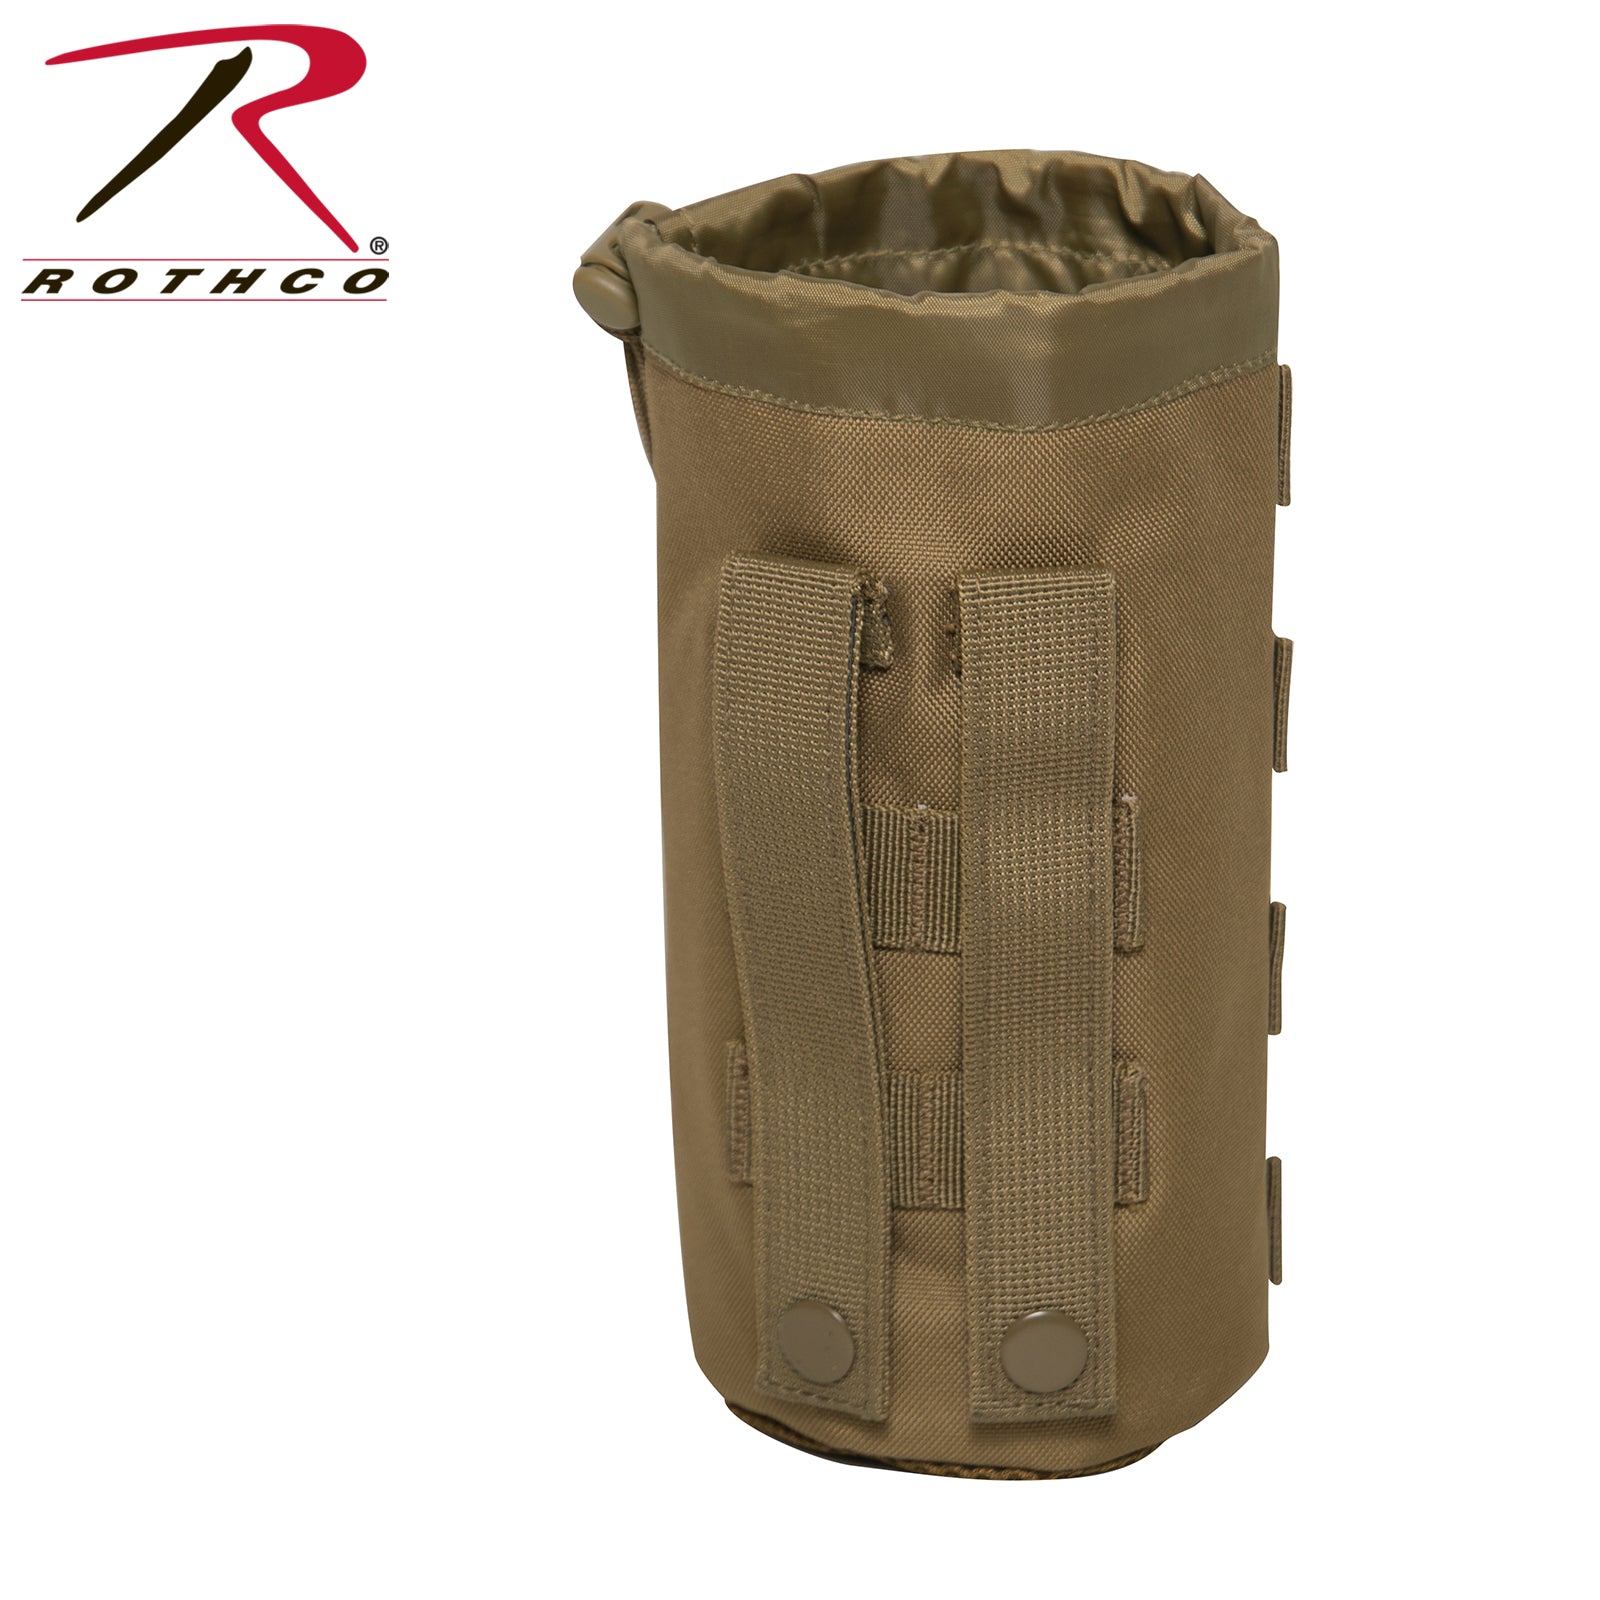 Rothco Tactical Molle Bottle Carrier